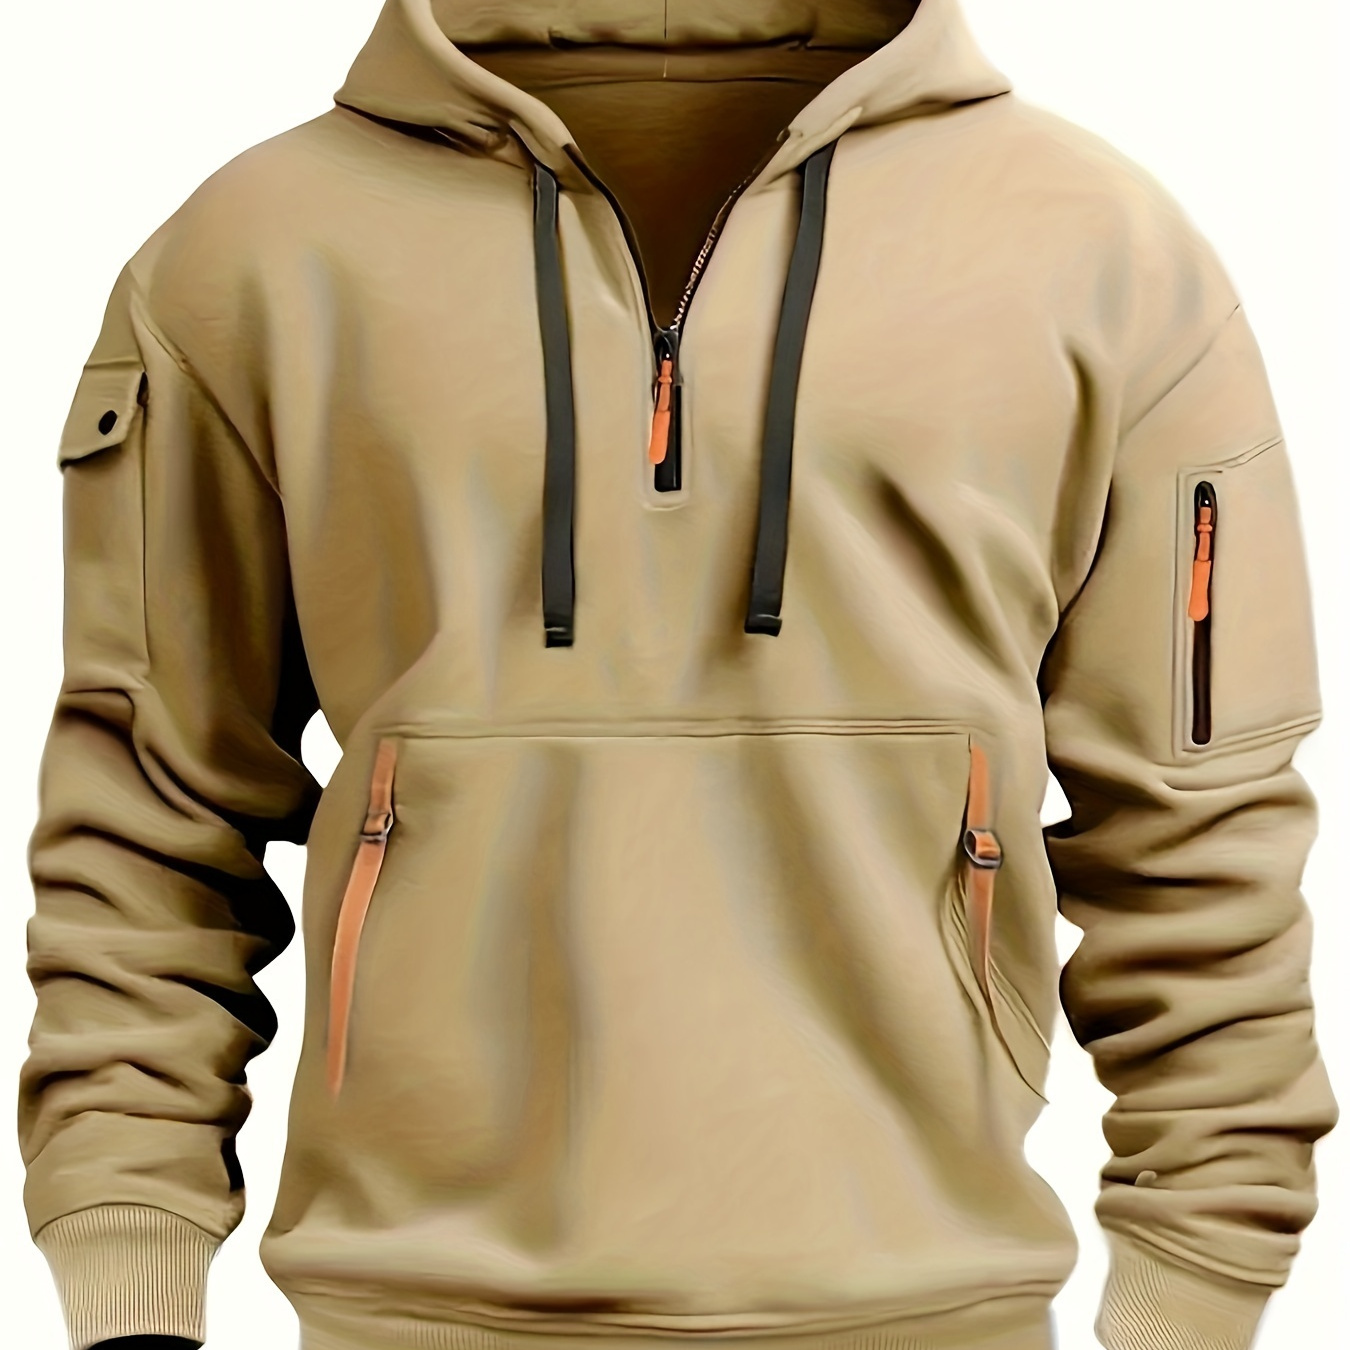 

Men's Casual Sport Half-zip Hoodie With Arm Pocket And Colorful Ribbon Detail, Fashion Pullover Hooded Sweatshirt Outerwear